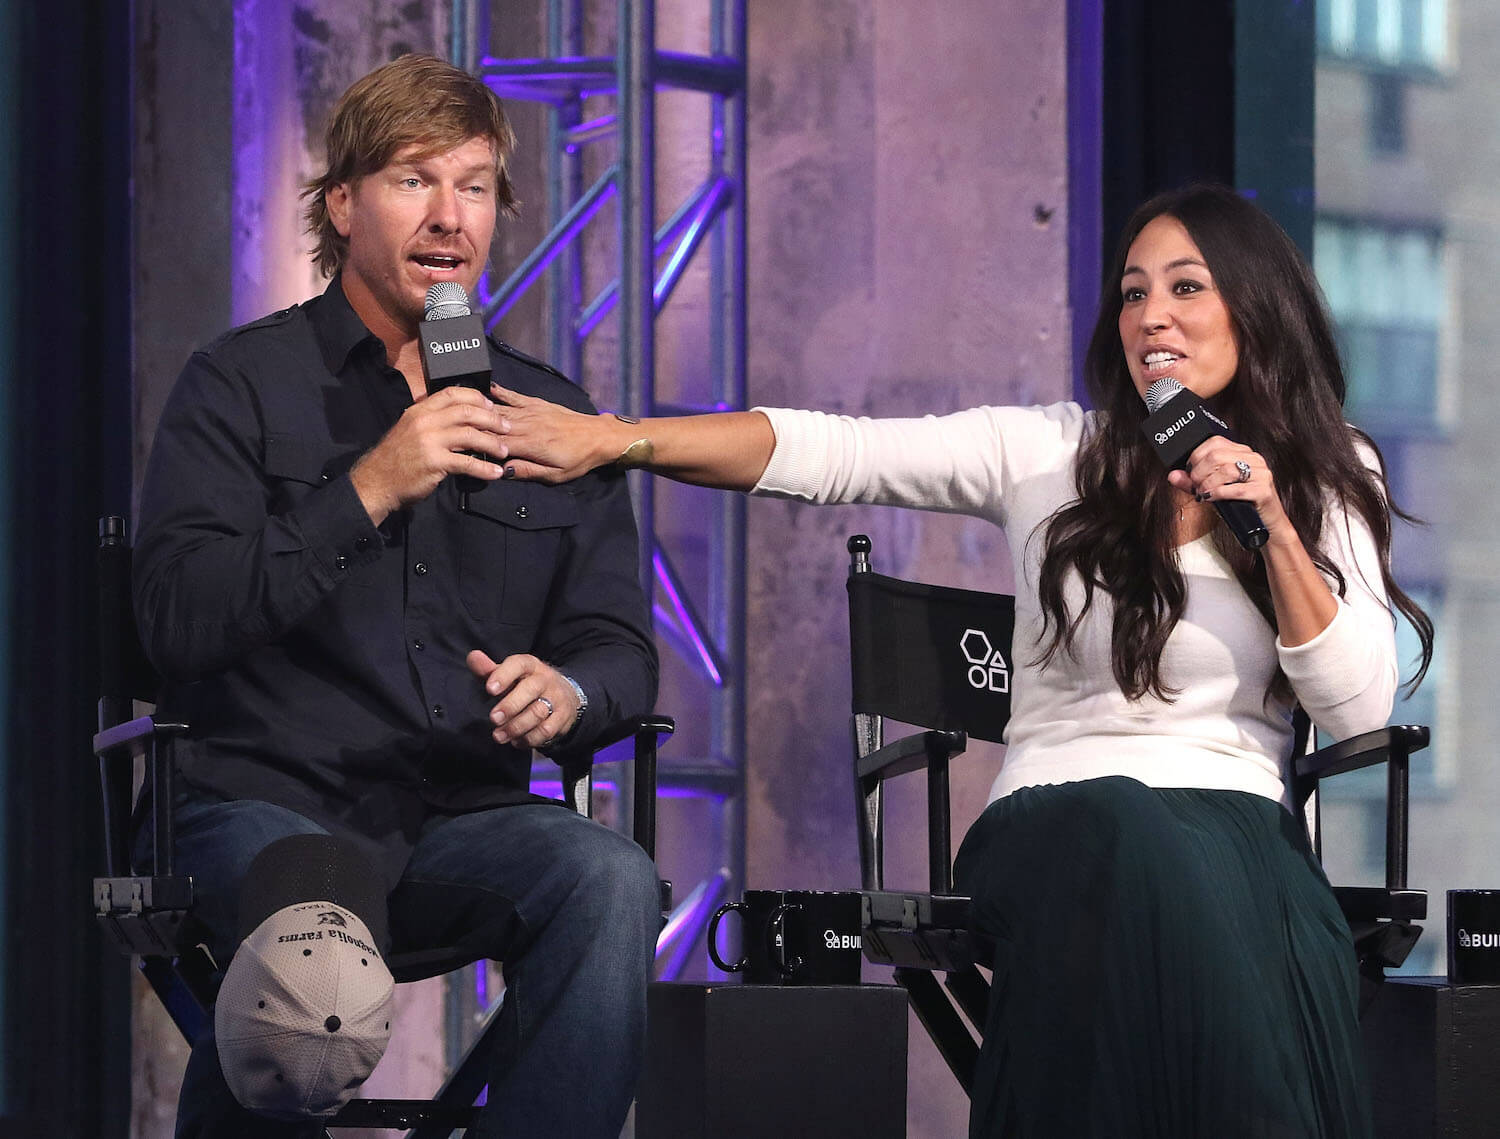 Chip and Joanna Gaines from 'Fixer Upper' sitting next to each other for an interview